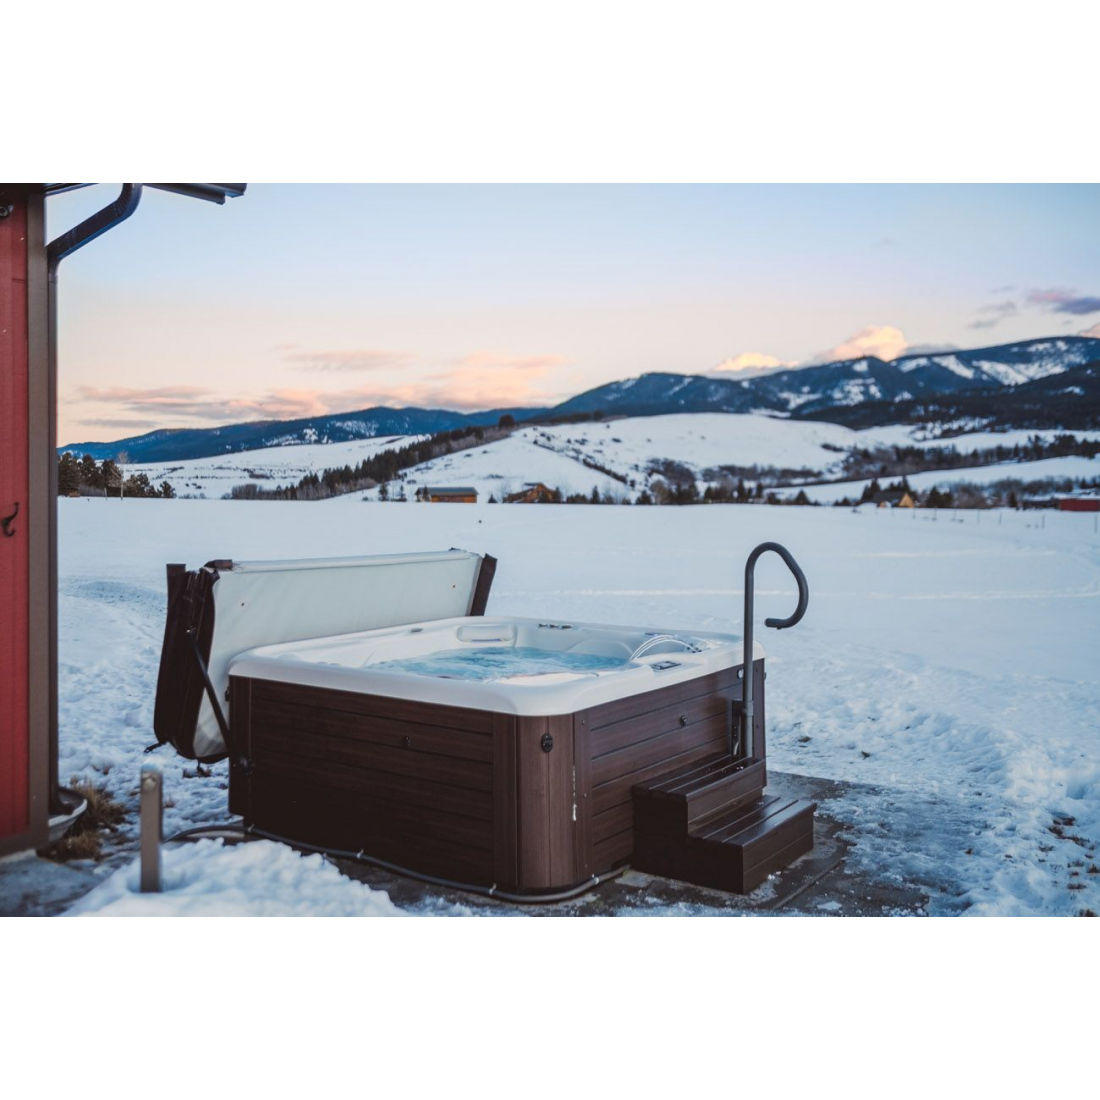 Using Your Hot Tub During Winter